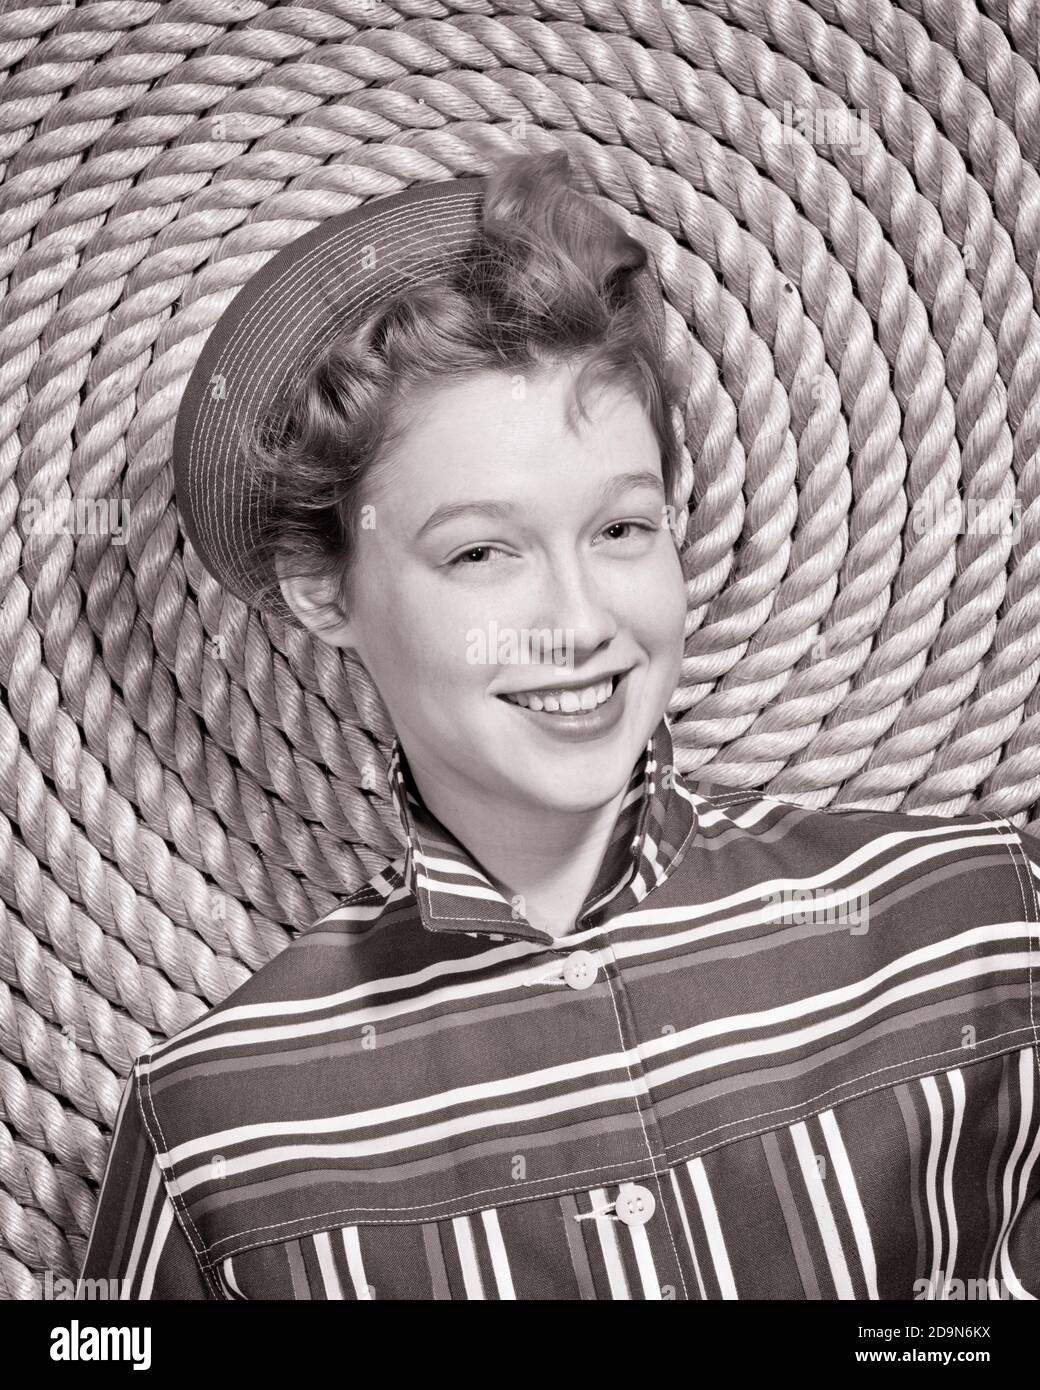 1960s SMILING YOUNG WOMAN SAILOR WEARING STITCHED CAP STRIPED SHIRT LOOKING AT CAMERA LEANING ON SPIRAL OF COILED NAUTICAL ROPE - g5074 HAR001 HARS OLD FASHION 1 JUVENILE FACIAL SAILING YOUNG ADULT PLEASED JOY LIFESTYLE SAILOR FEMALES STRIPED STUDIO SHOT HEALTHINESS COPY SPACE LADIES PERSONS TEENAGE GIRL NAUTICAL EXPRESSIONS B&W EYE CONTACT THEME HAPPINESS CHEERFUL RECREATION OF ON SMILES SPIRAL BOATING COILED JOYFUL TEENAGED PLEASANT FRESH-FACED JUVENILES STITCHED YOUNG ADULT WOMAN YOUNGSTER YOUTHFUL BLACK AND WHITE CAUCASIAN ETHNICITY HAR001 OLD FASHIONED Stock Photo